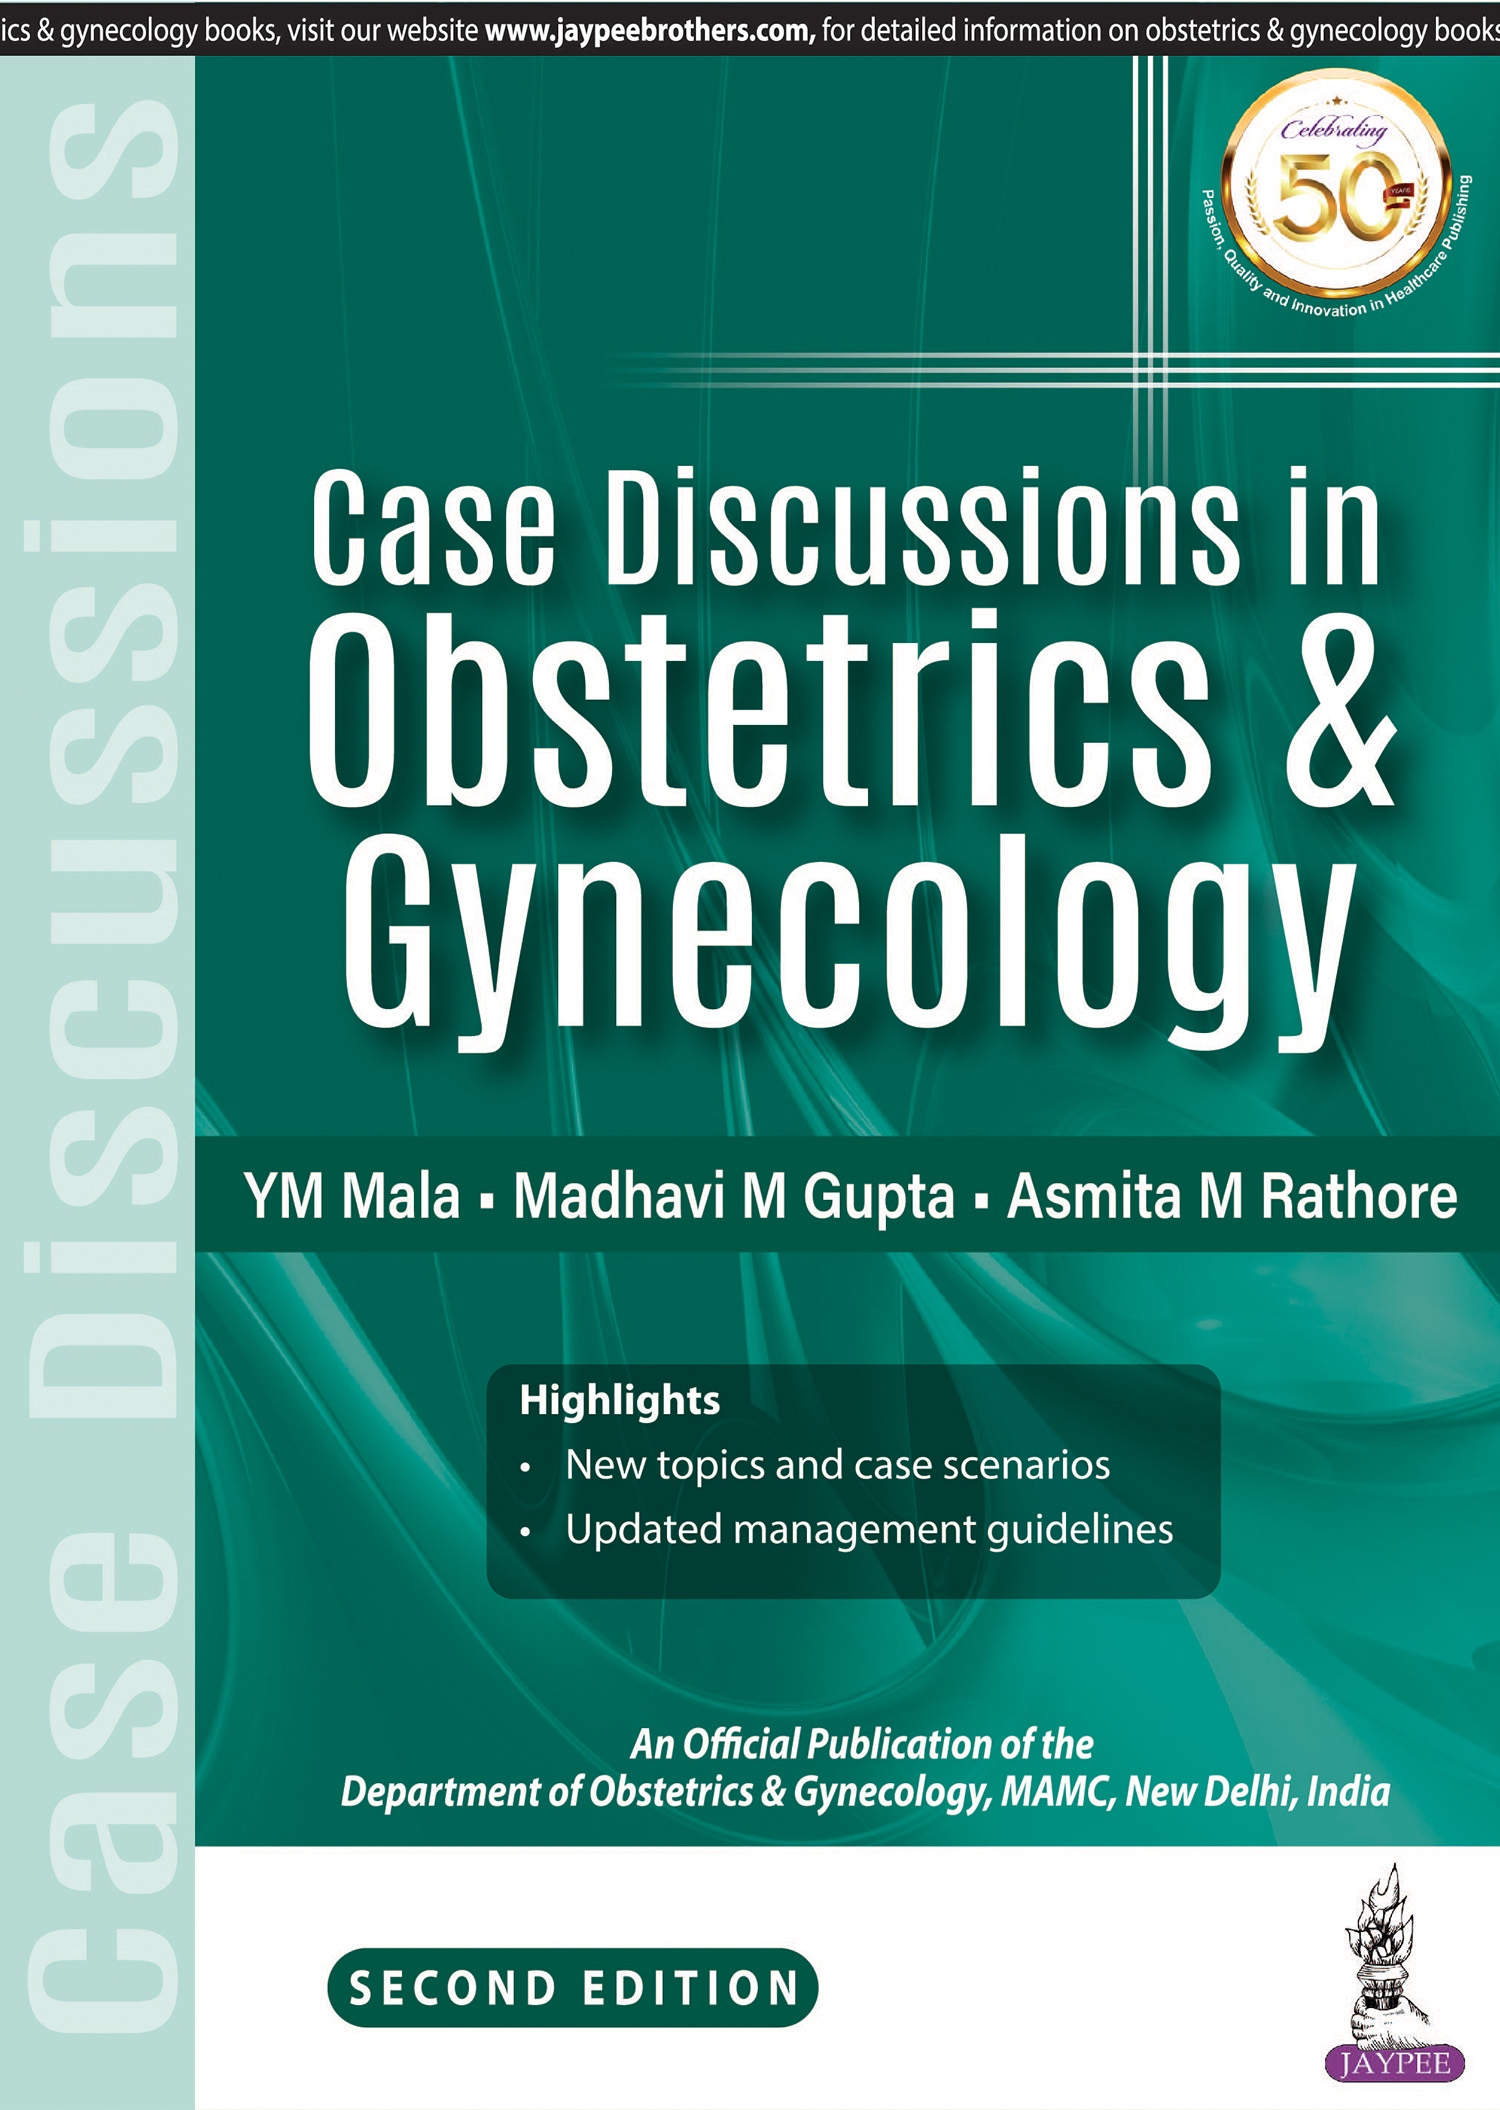 case-discussion-in-obstetrics-gynecology